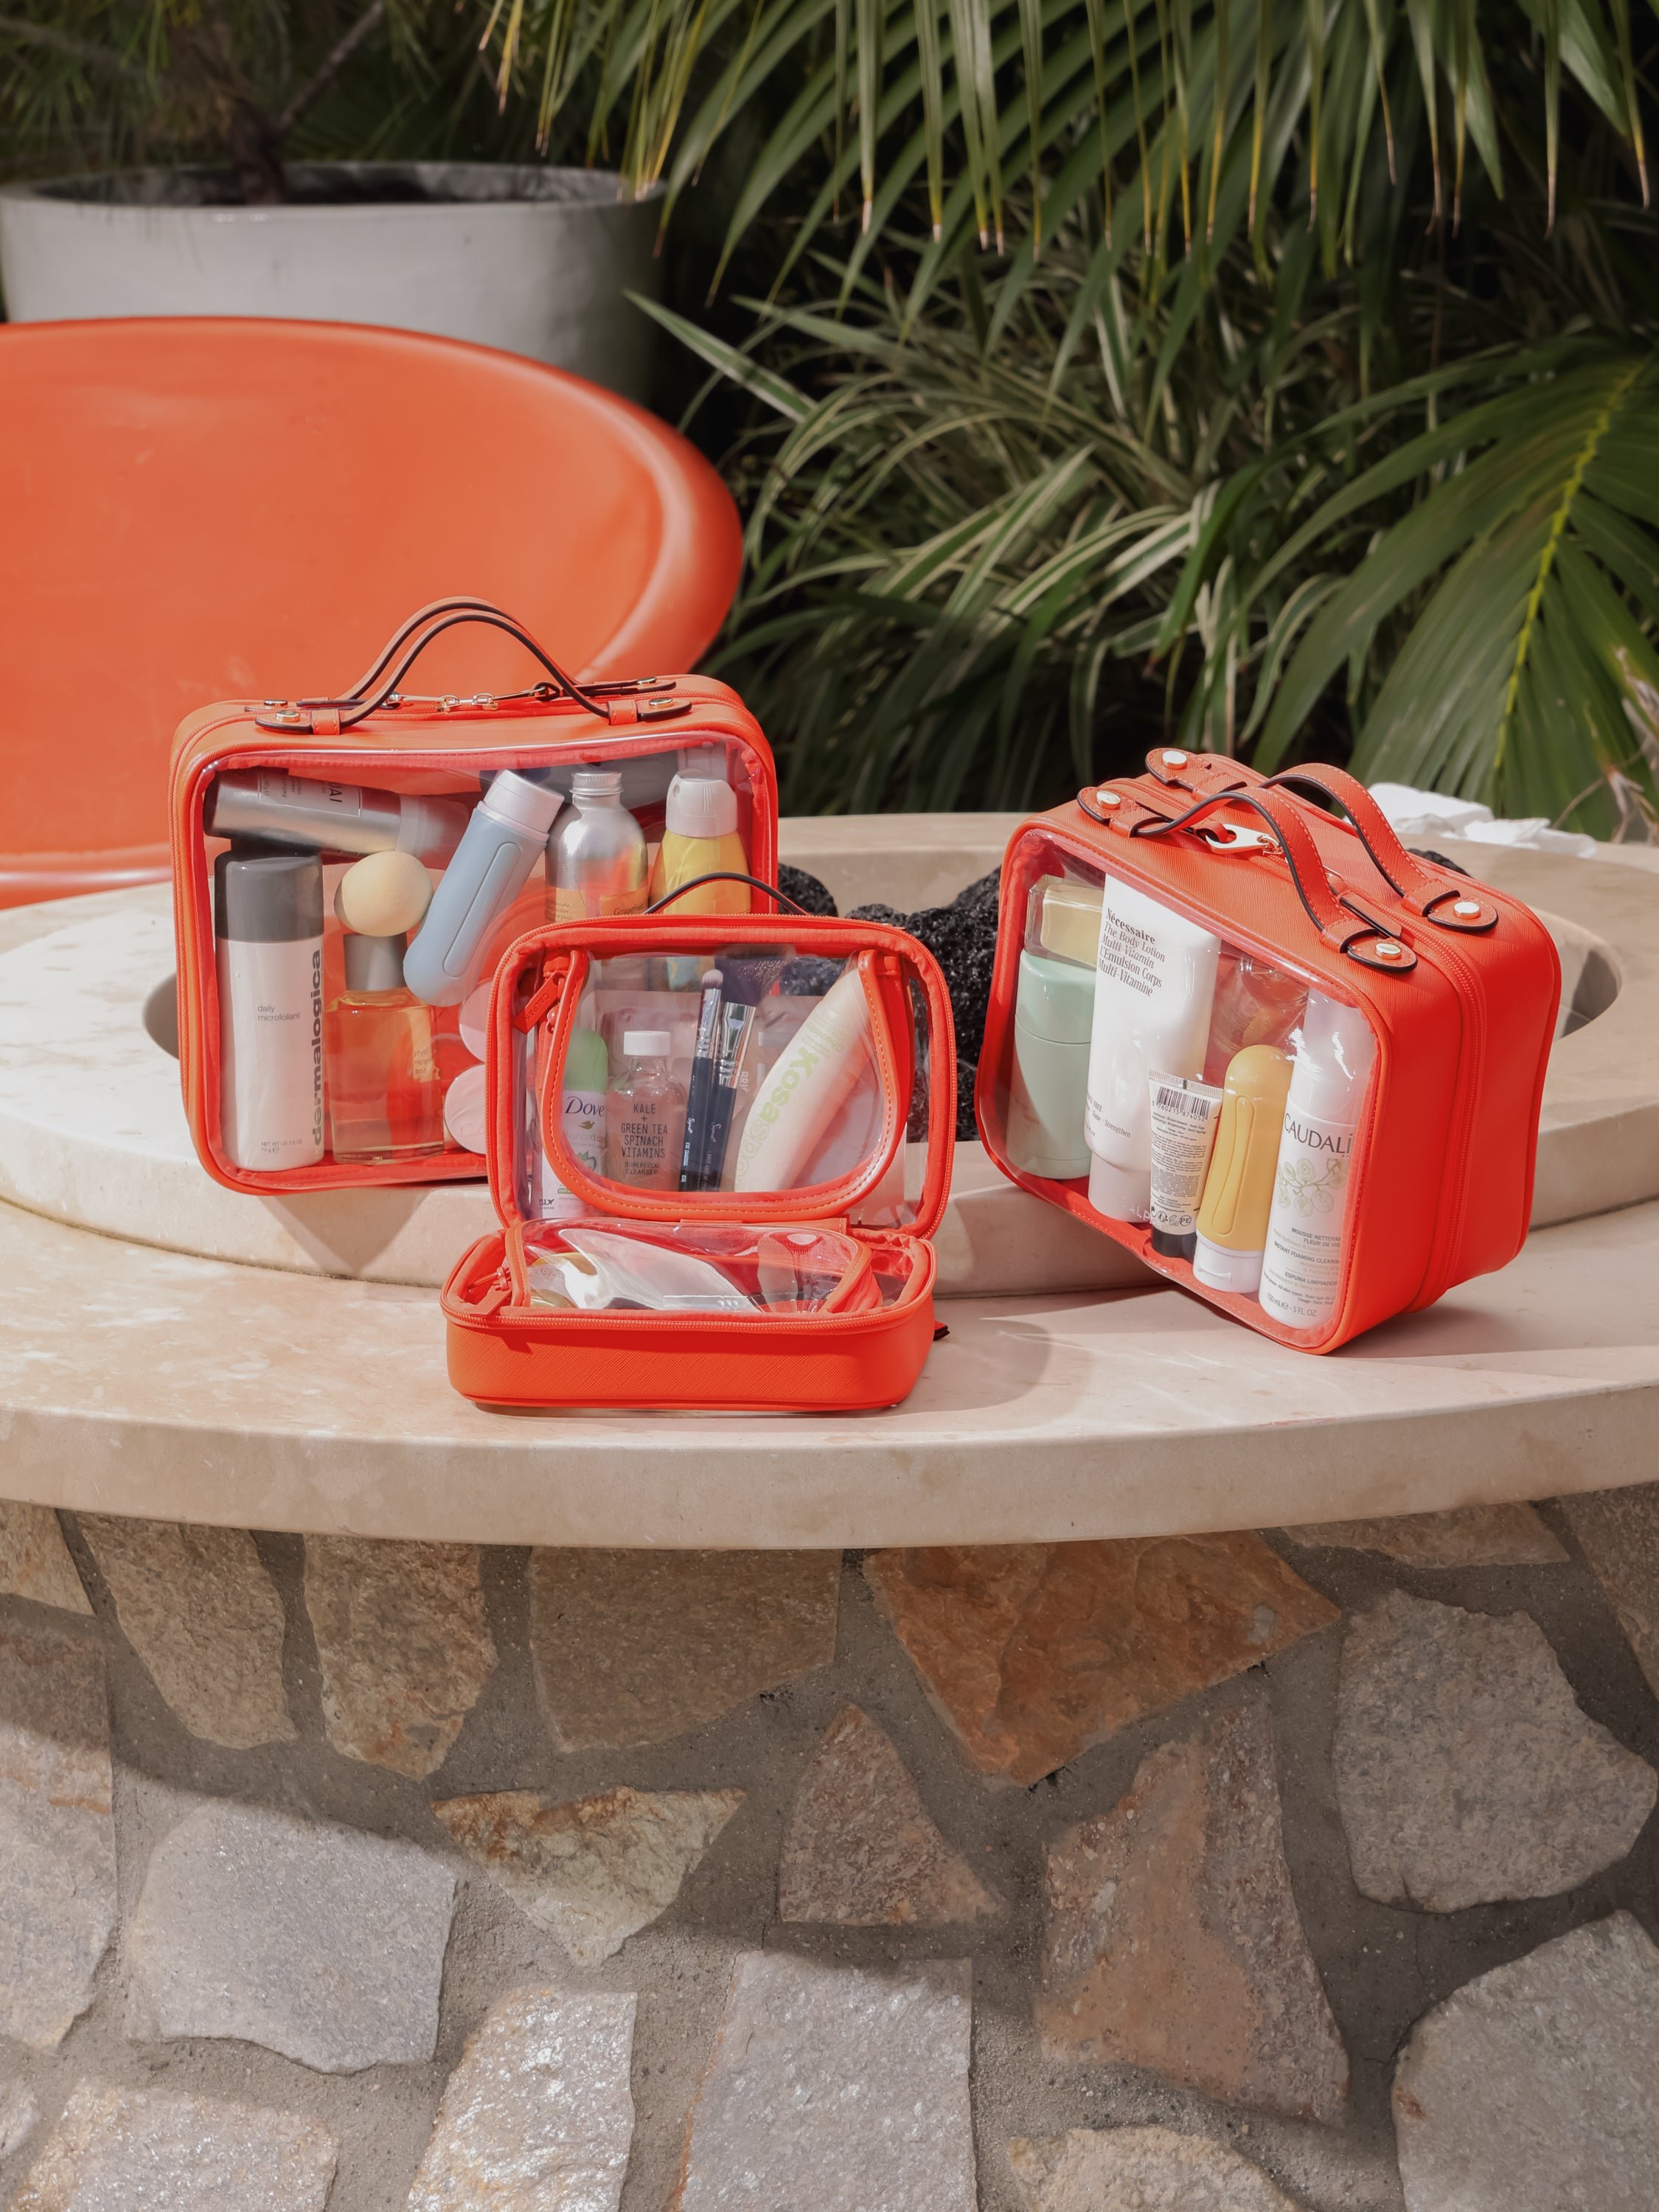 CALPAK orange clear makeup cases with zippered compartments in small, medium and large sizes